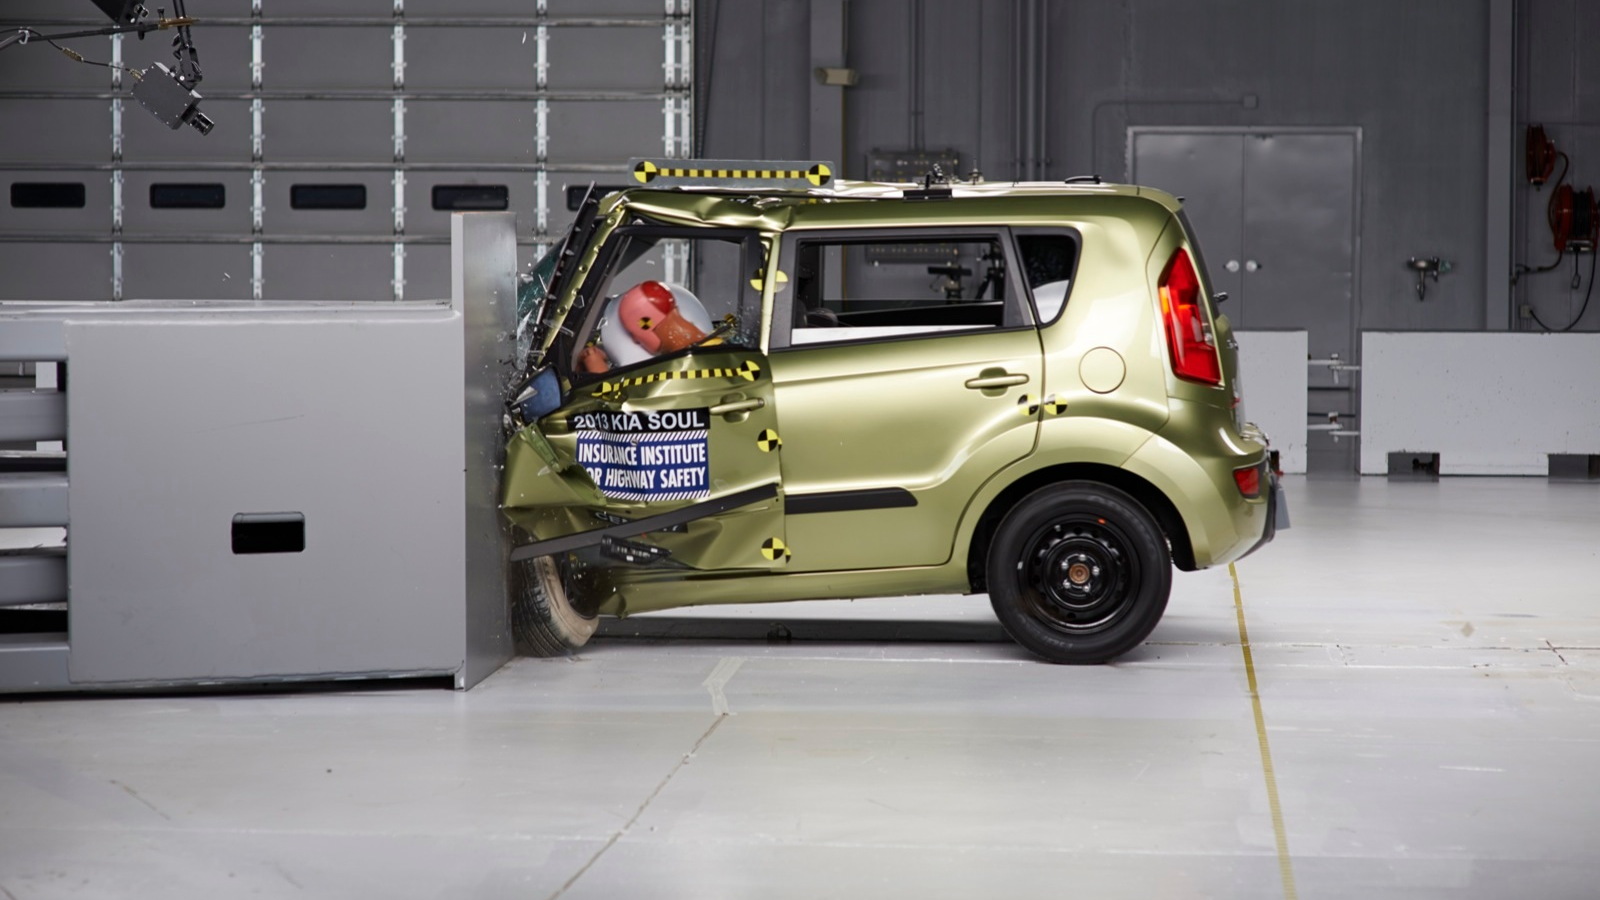 2013 Kia Soul  -  rated POOR in IIHS small overlap frontal impact test